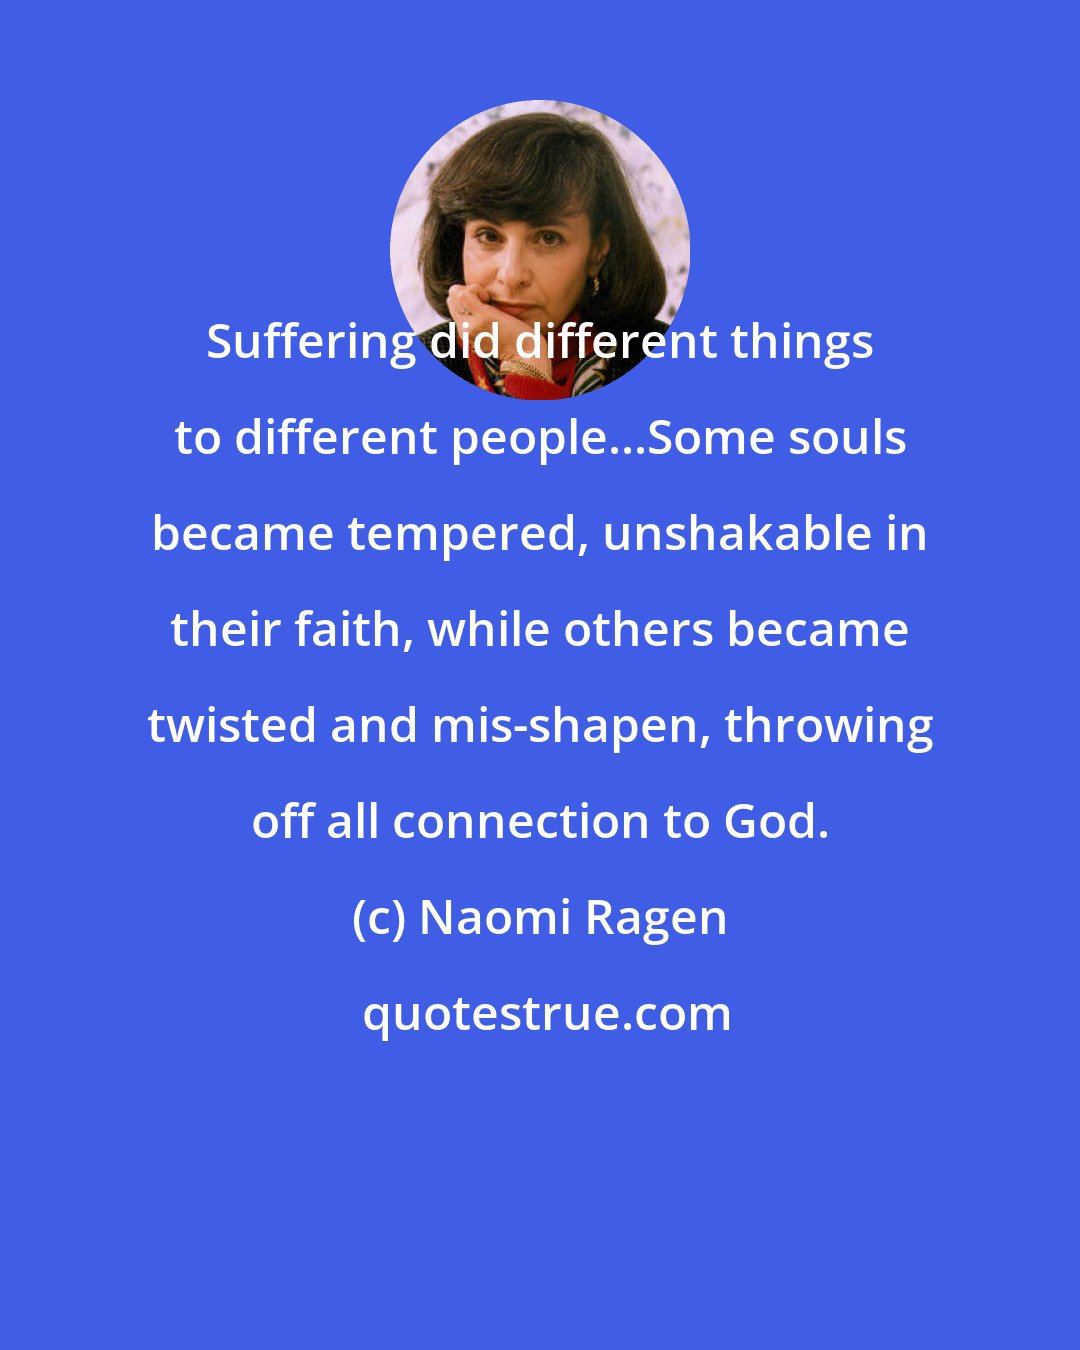 Naomi Ragen: Suffering did different things to different people...Some souls became tempered, unshakable in their faith, while others became twisted and mis-shapen, throwing off all connection to God.